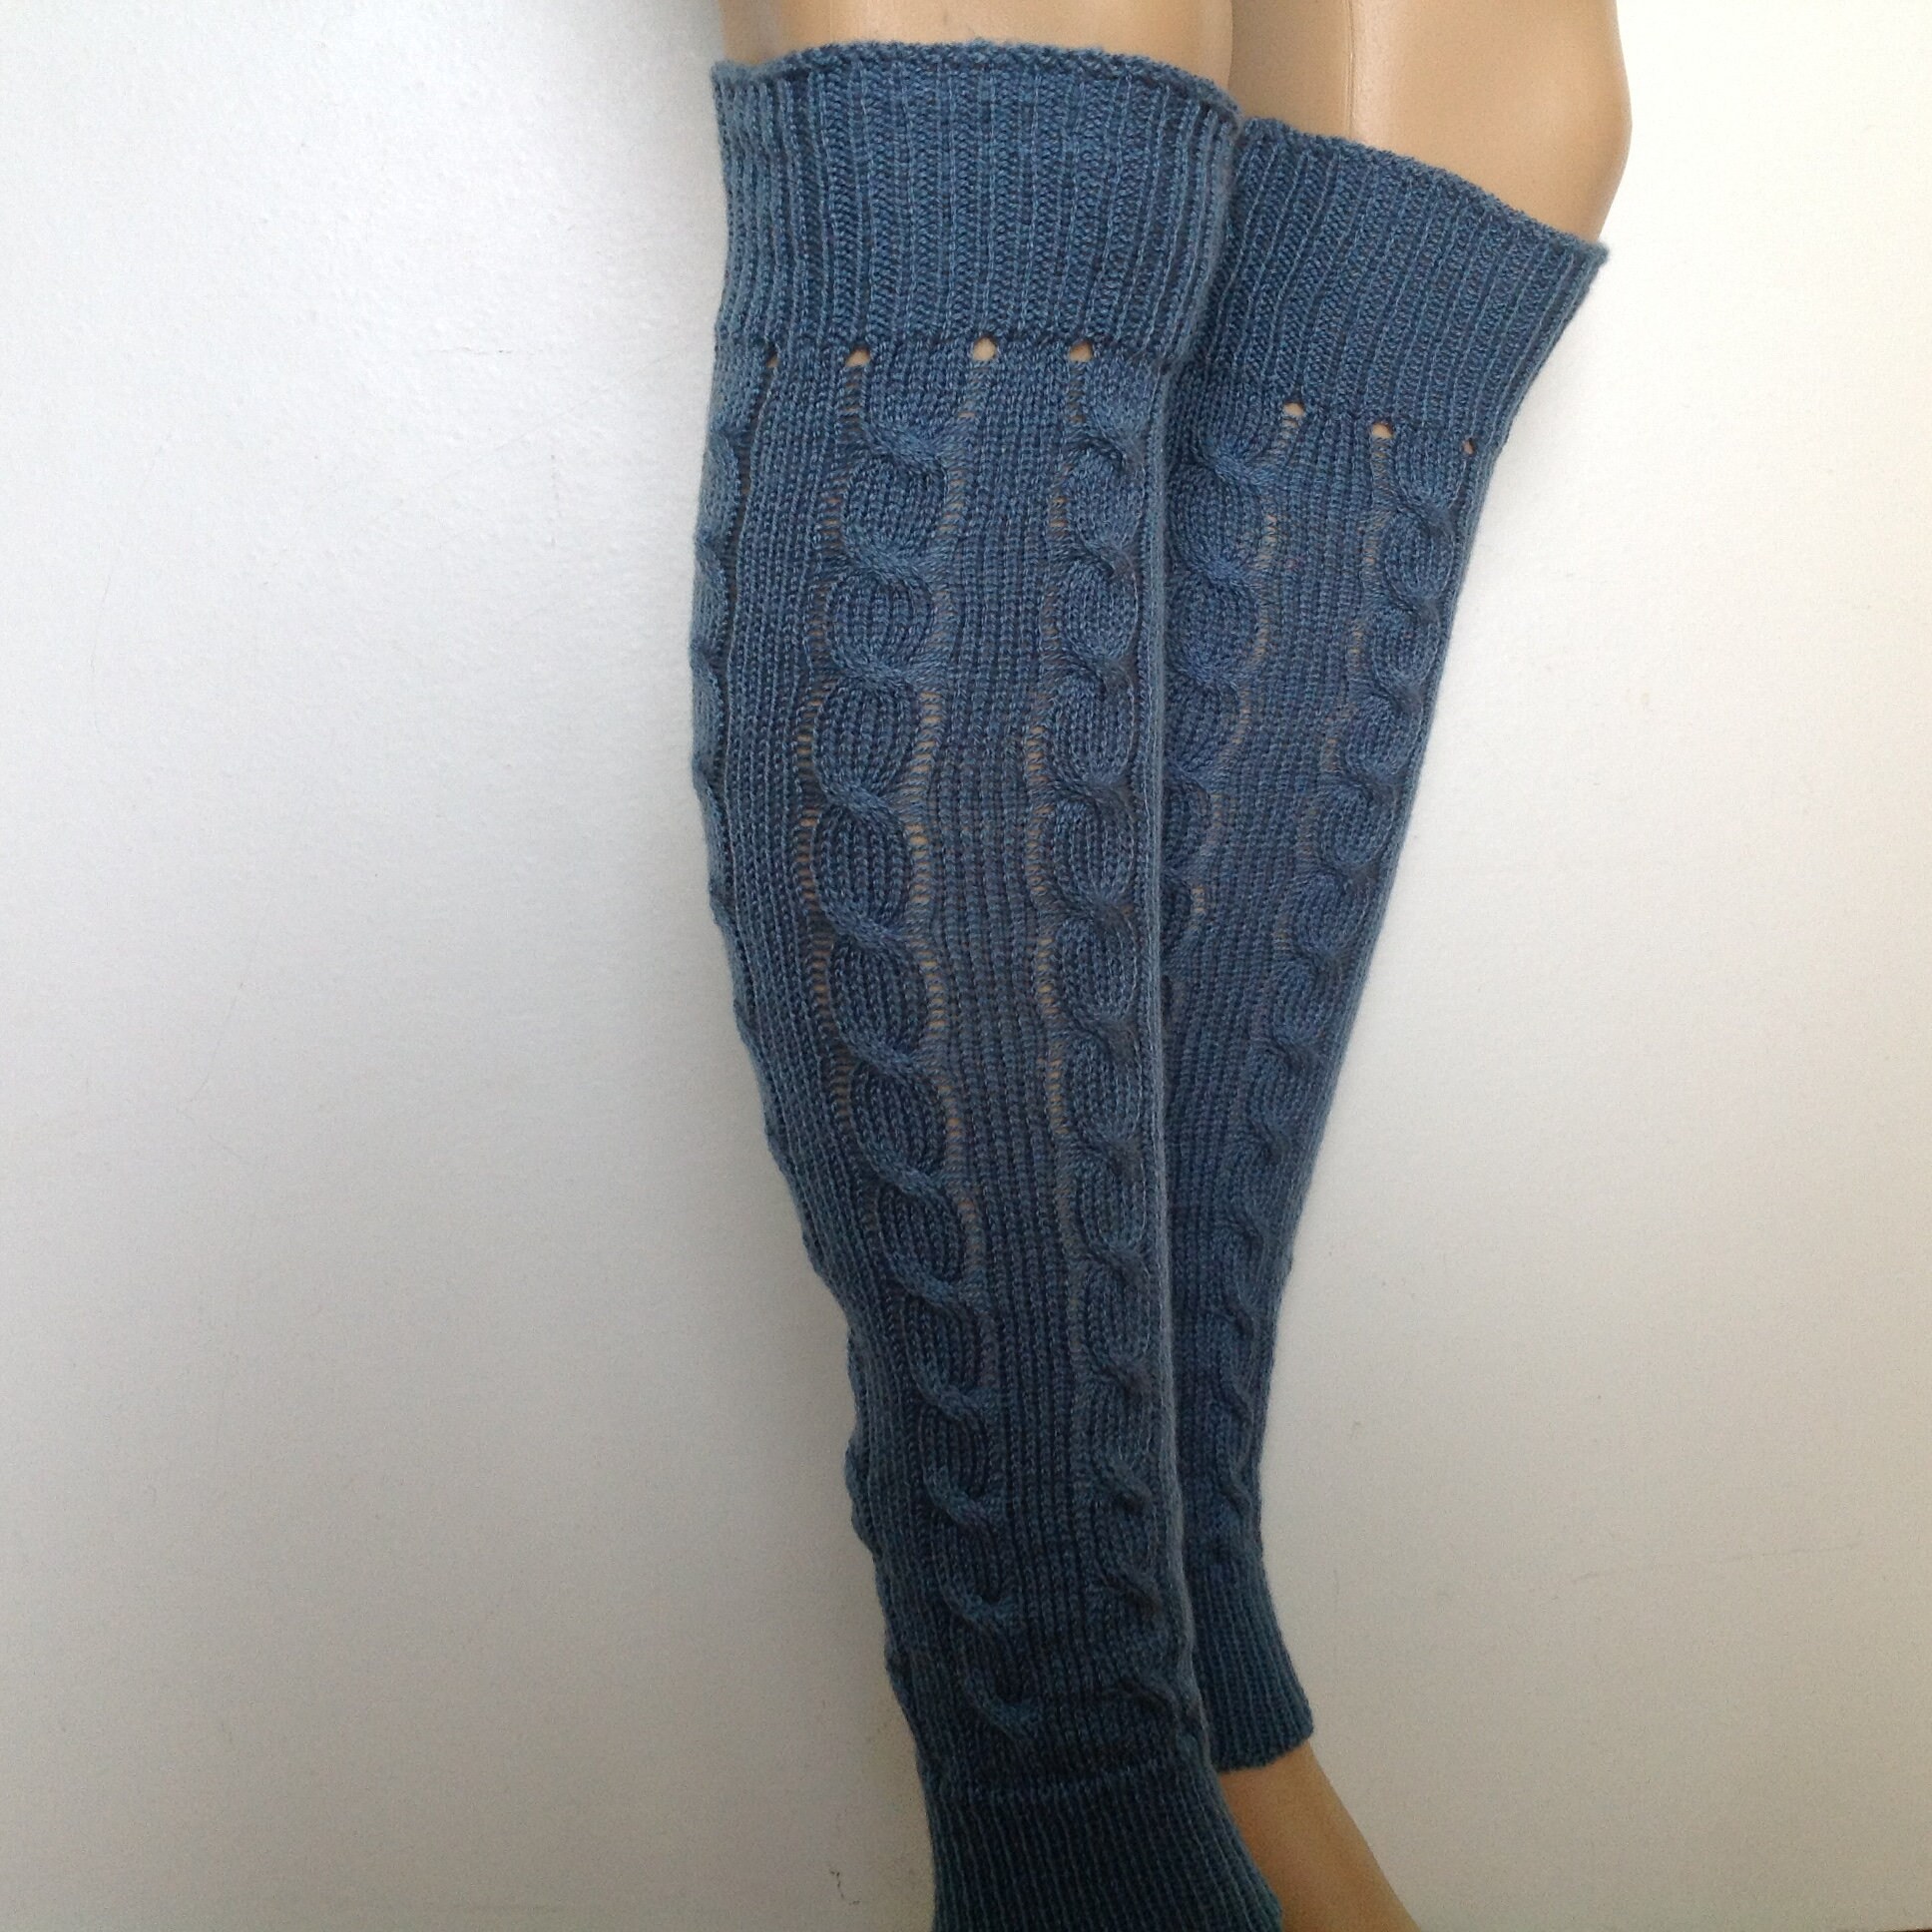 Cable Knit Long Leg Warmers,legging,yoga,sexylegwarmers, Winter Fashion,  Knitted Legwarmers, Teal Lake Color or Select Color. 